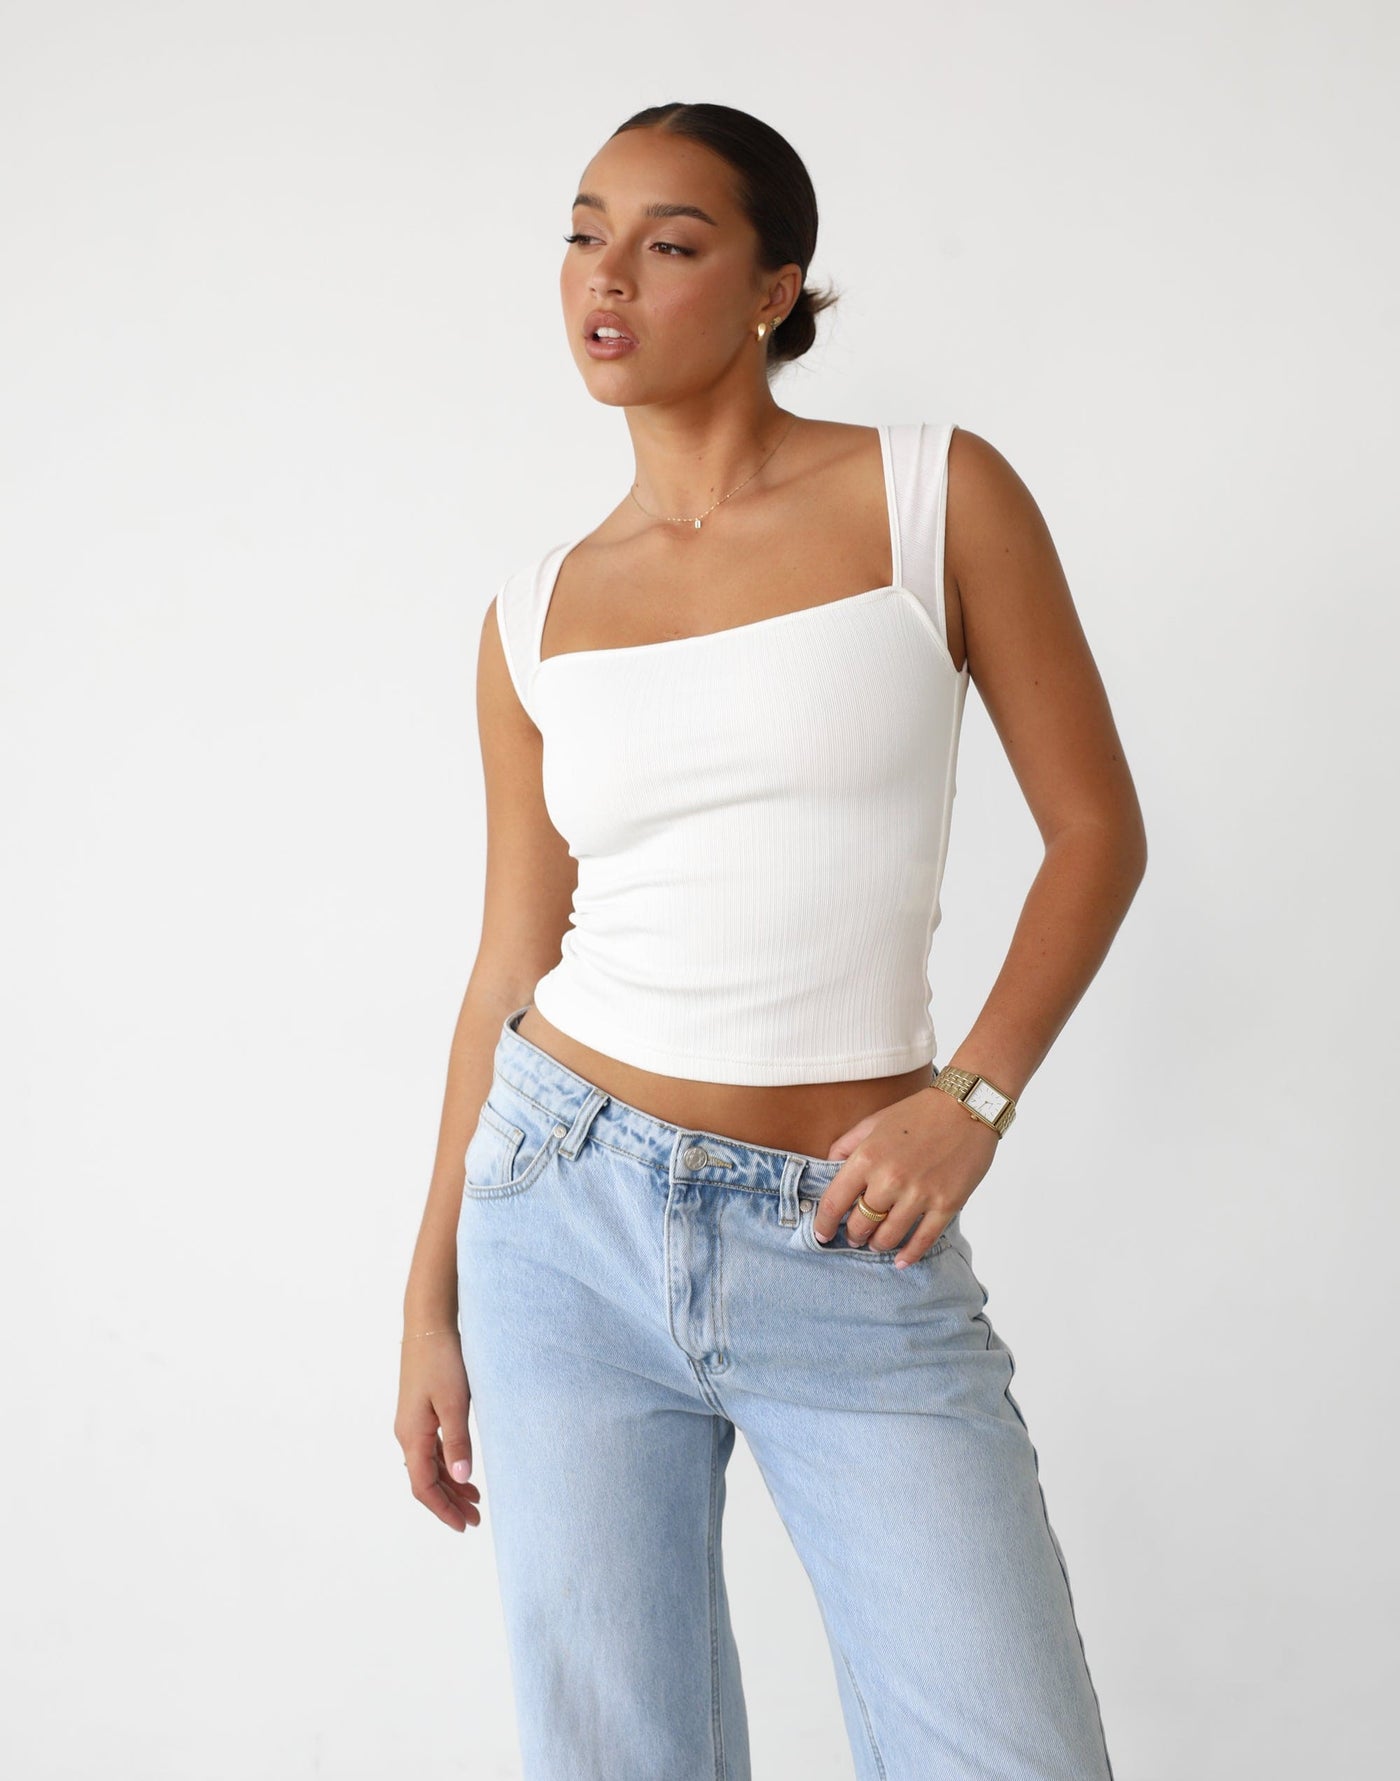 Avi Top (White) - White Thick Strap Straight Neckline Top - Women's Top - Charcoal Clothing